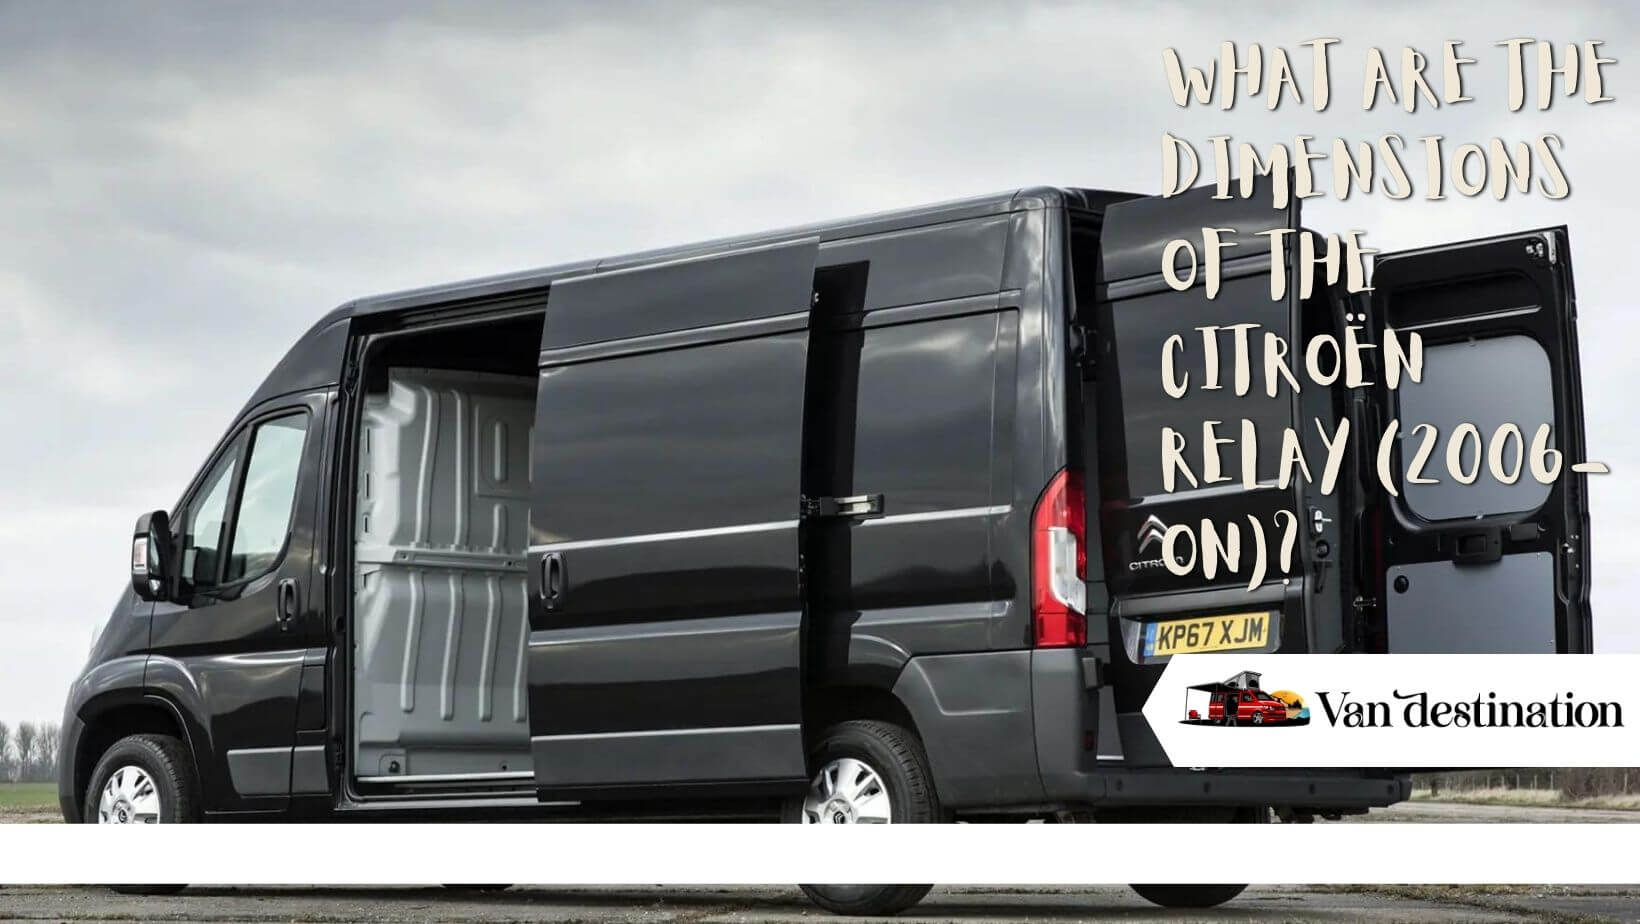 What are the Dimensions of the Citroën Relay (2006-on)